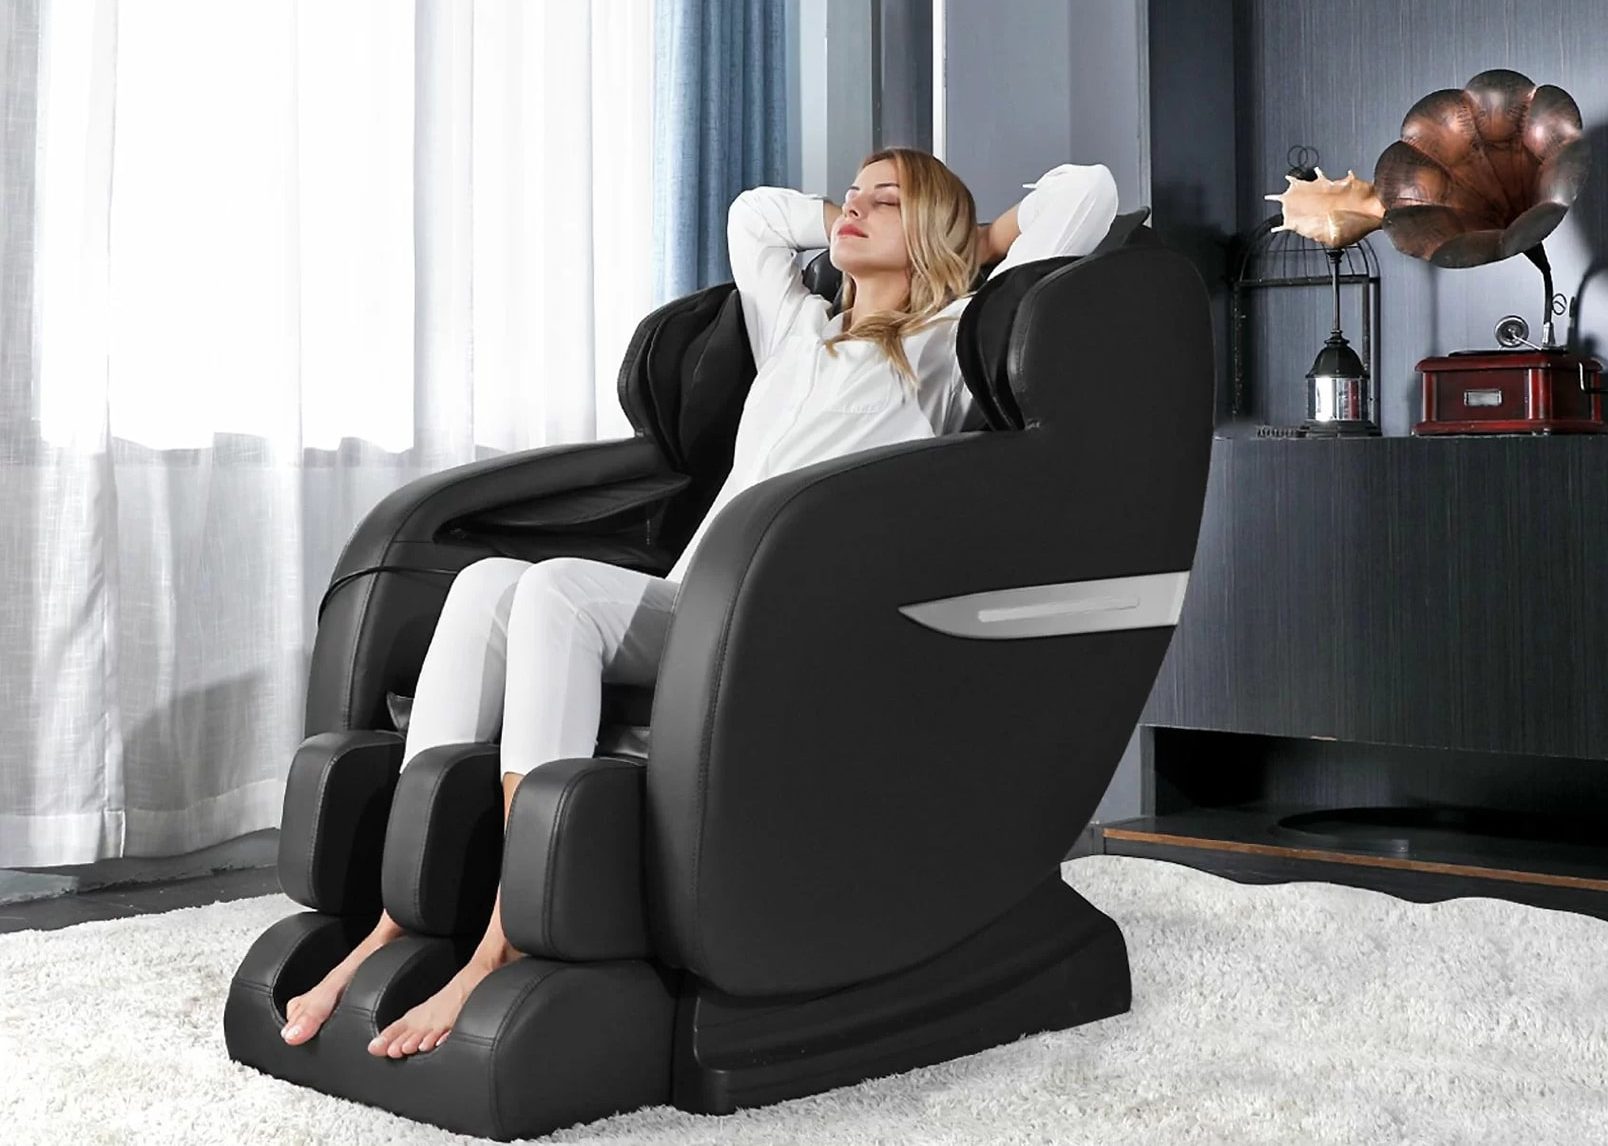 8 Best Massage Chairs for Back Pain (Spring 2022) – Which One to Buy?